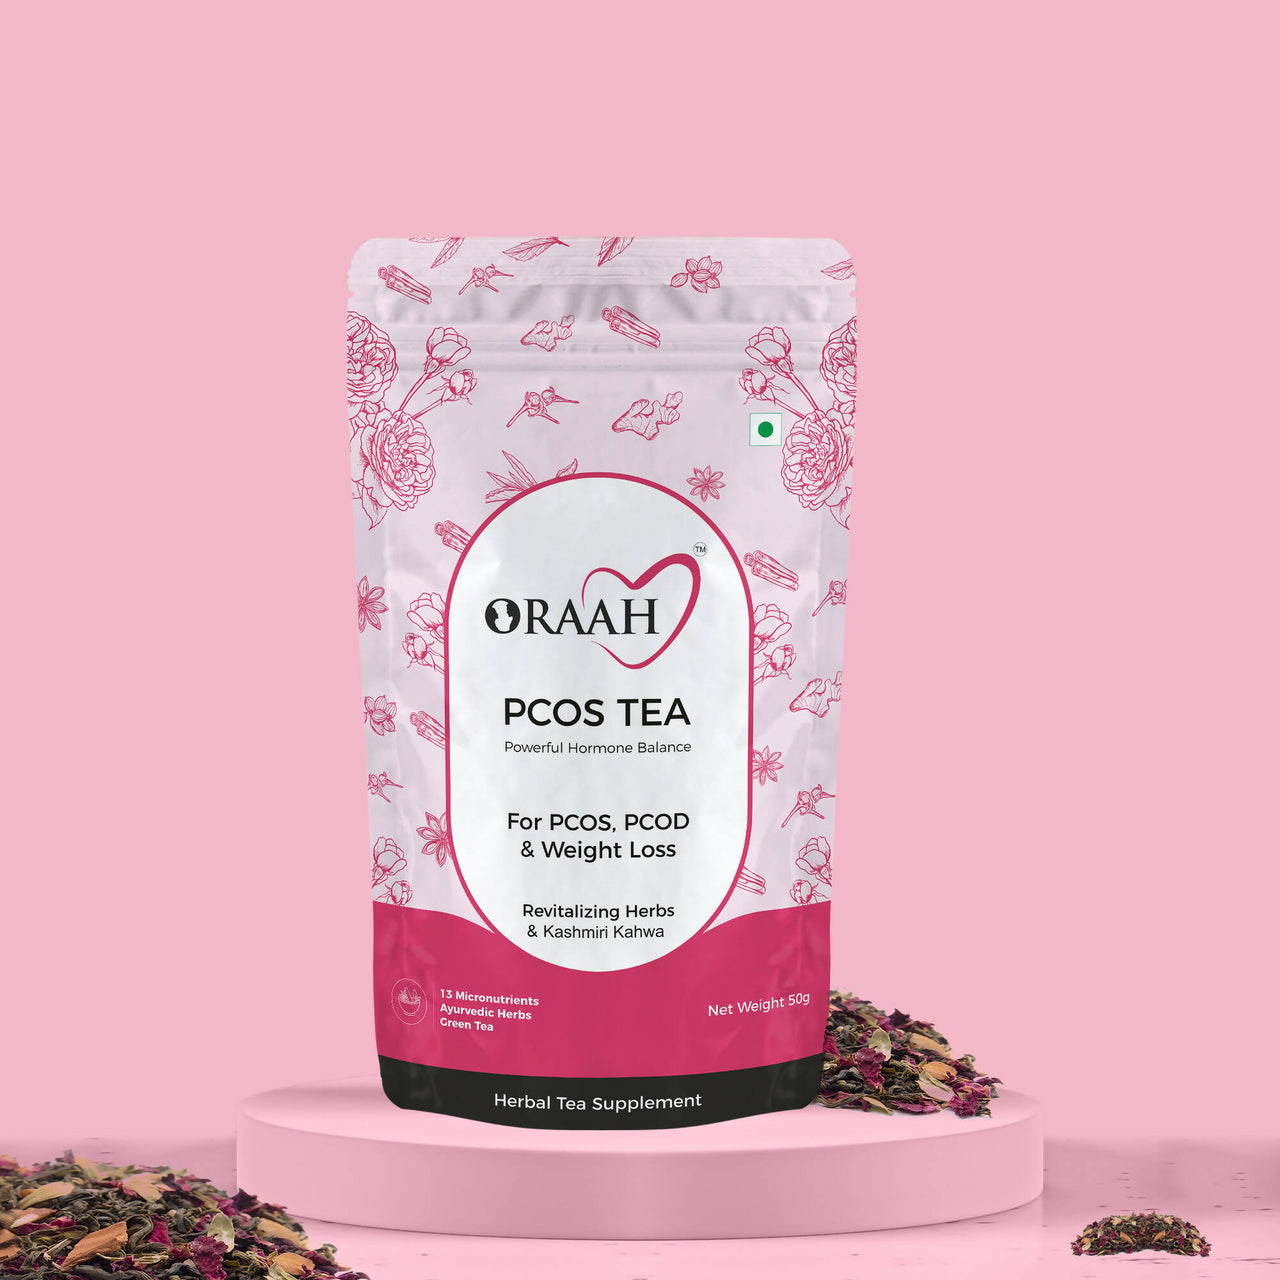 Oraah PCOS PCOD Care Combo (Kahwa Tea, Hair Removal Cream & Intimate Wipes) - Distacart